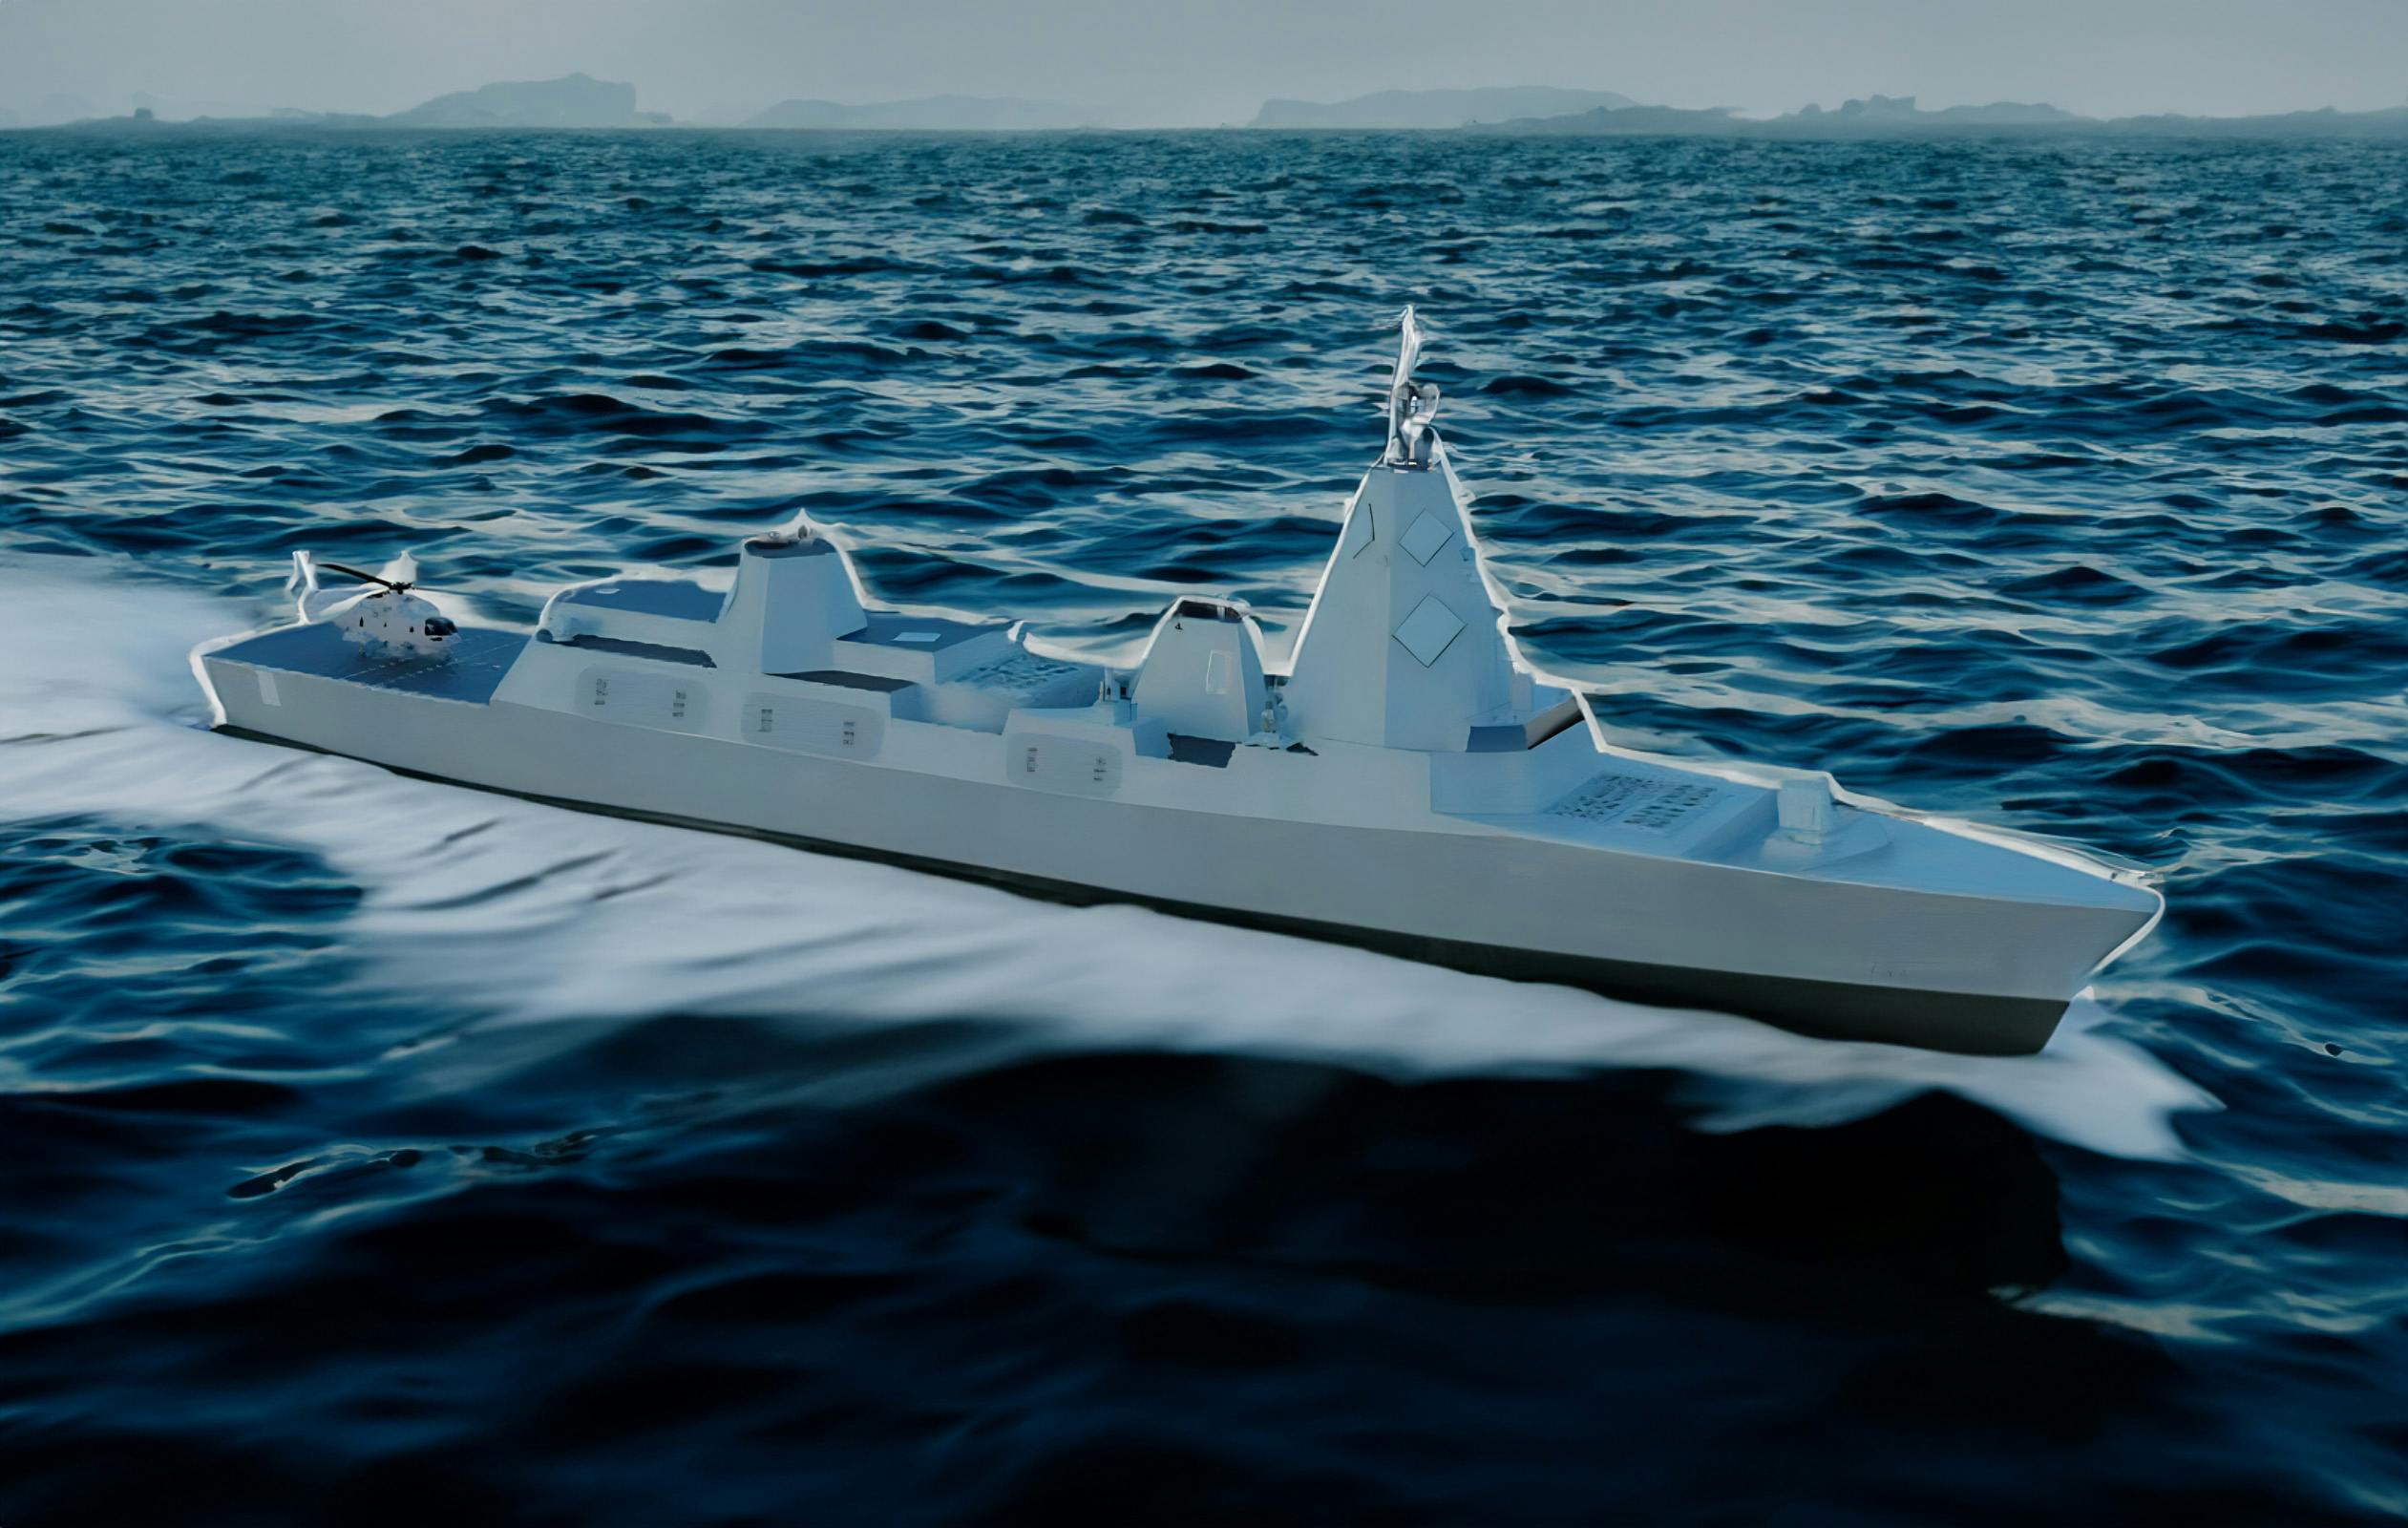 The Type 83 Destroyer – The MoD must get this right